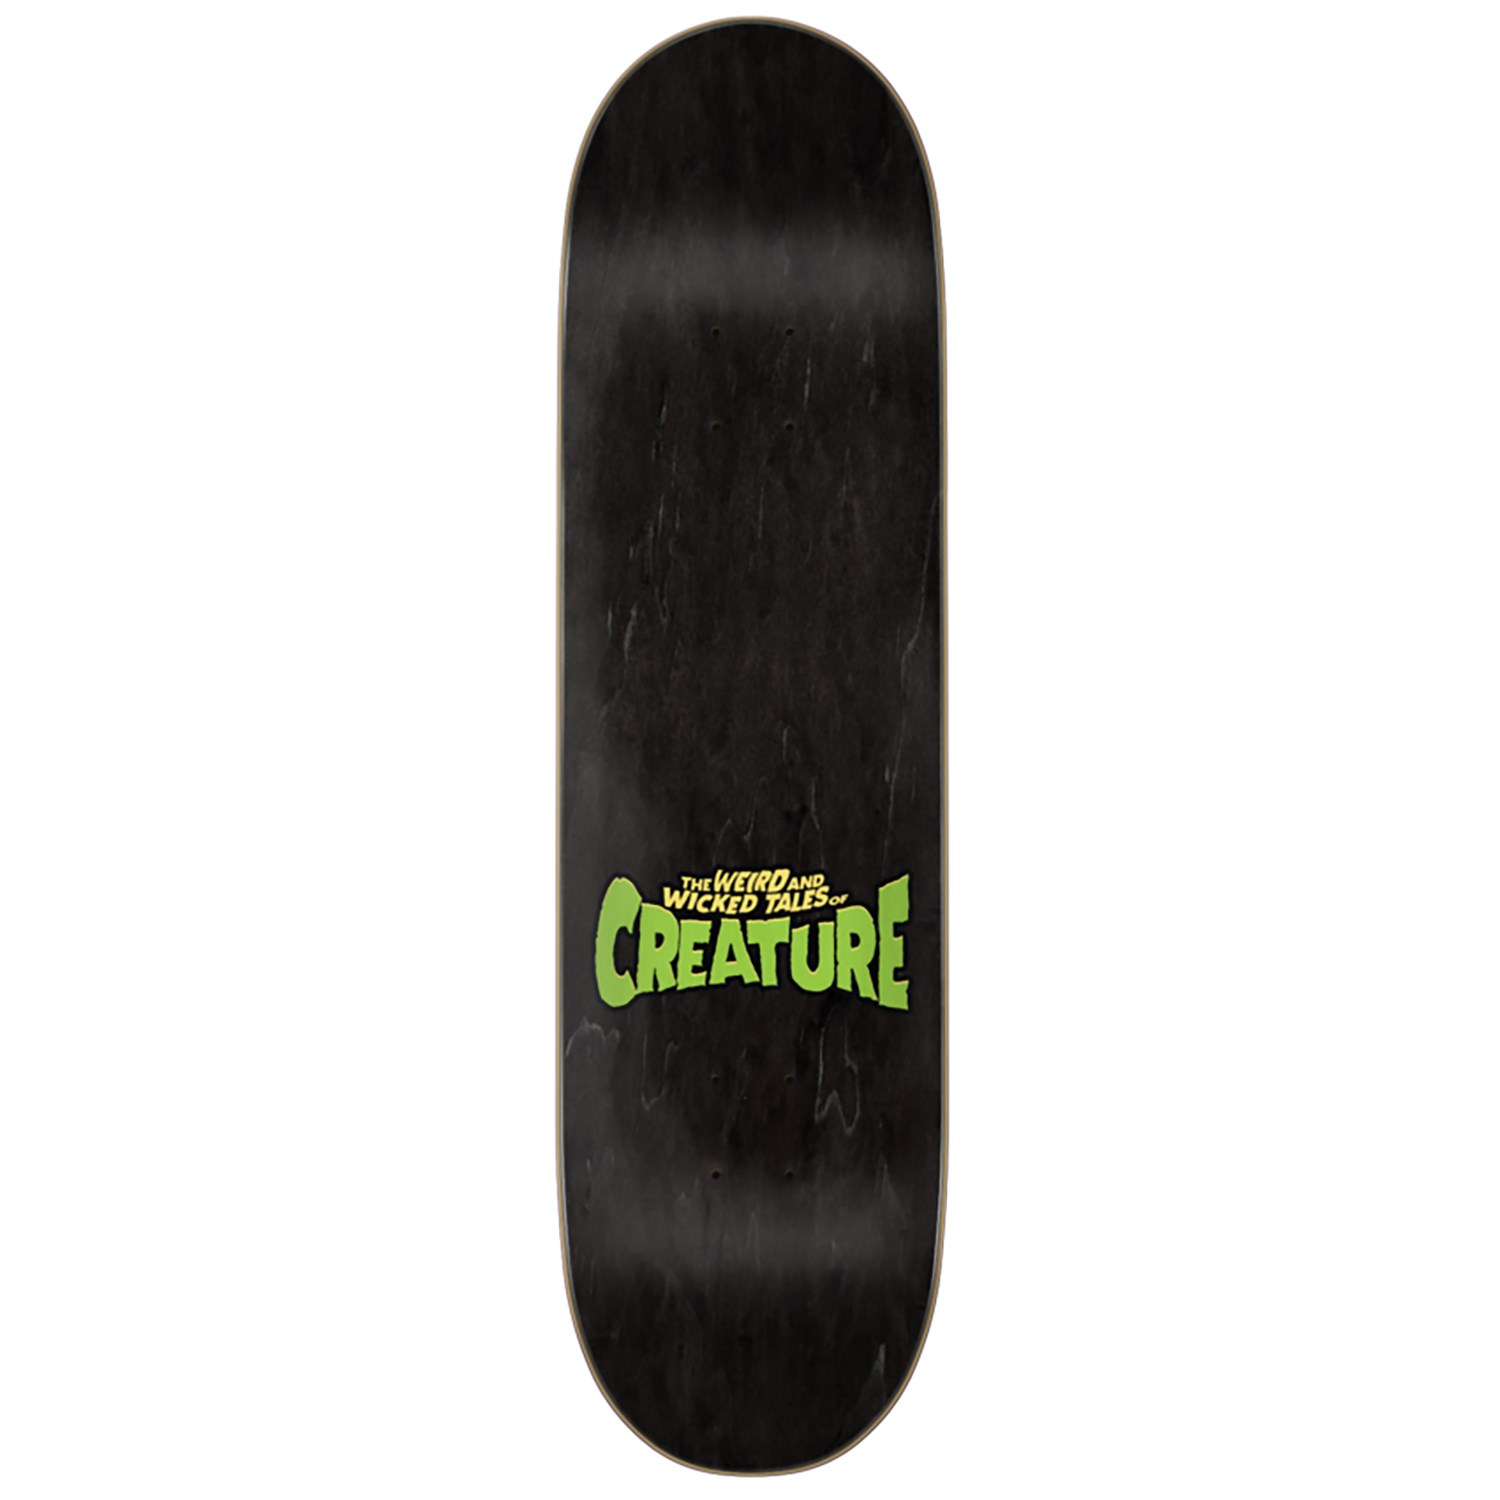 Creature Deck Russell Wicked Tales 8.5 x 32.25